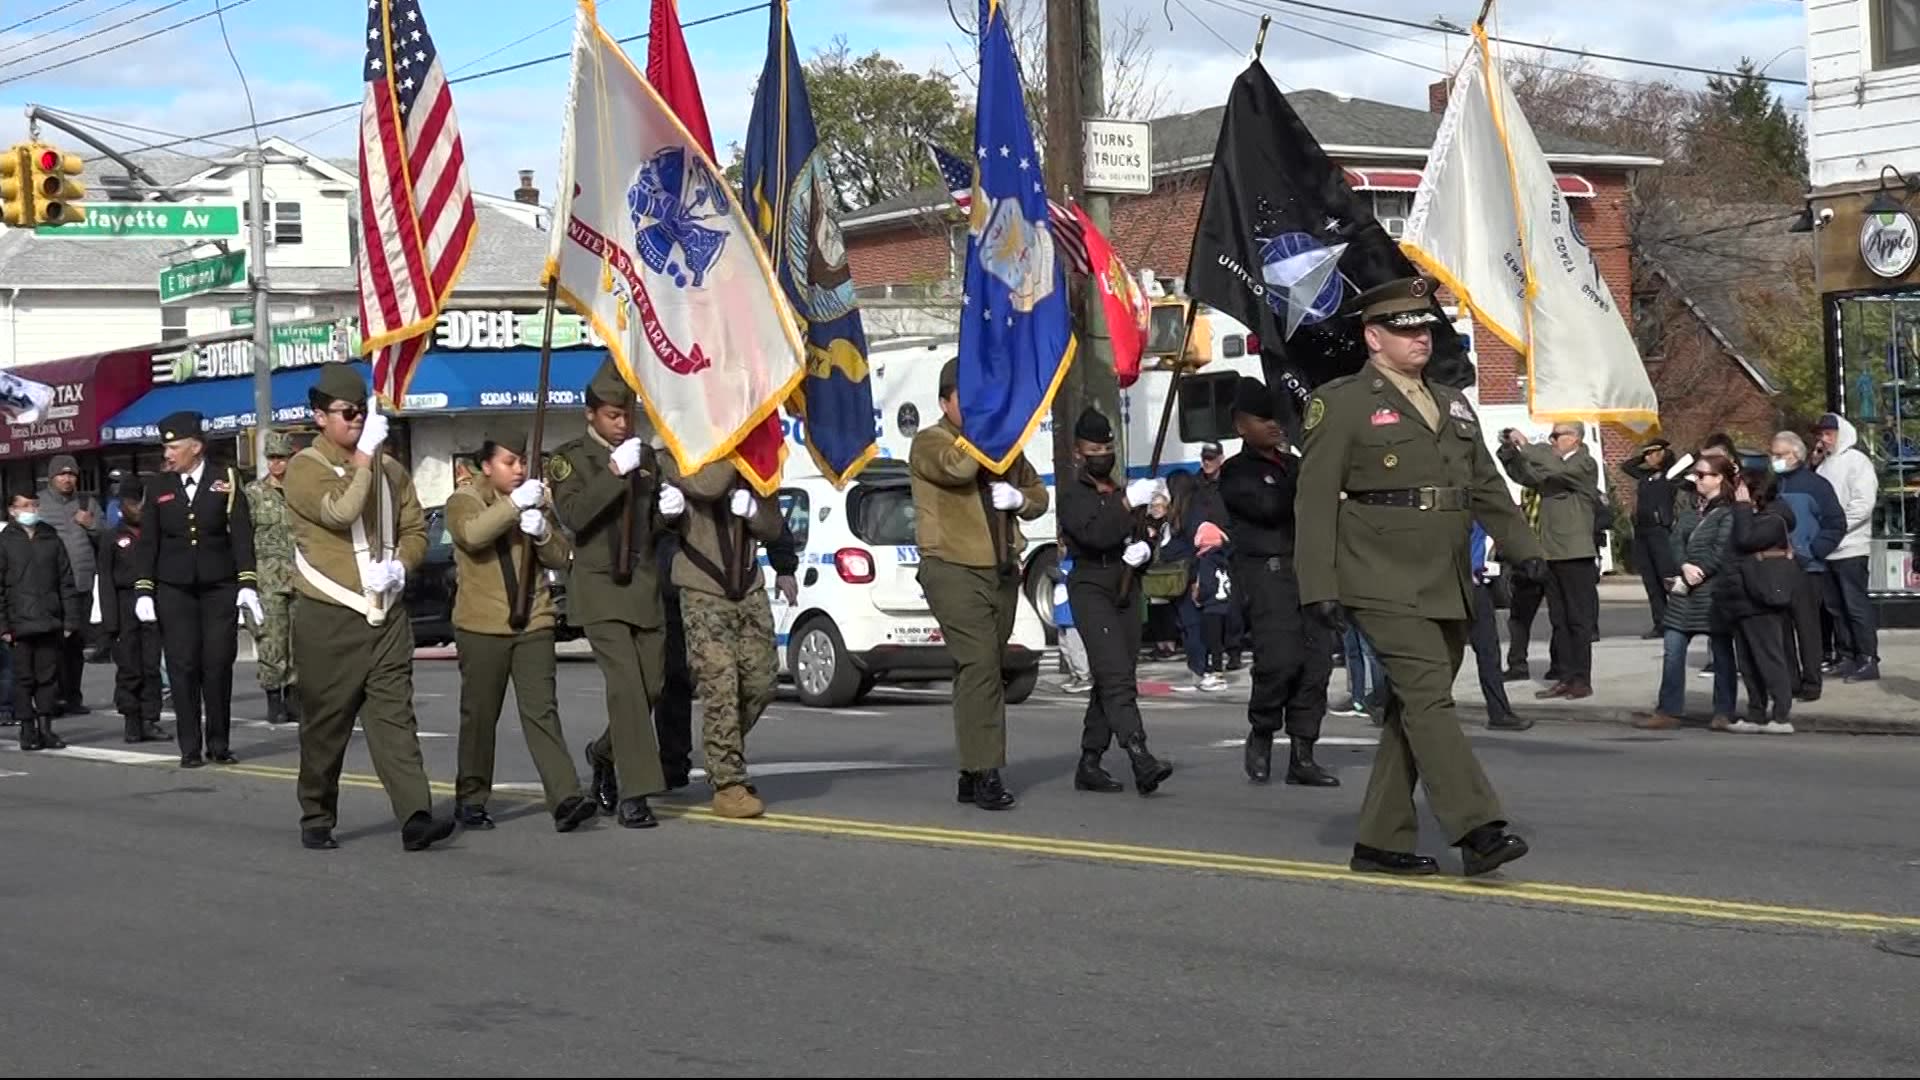 Bronx Vietnam veterans honored in 39th annual Veterans Day parade in